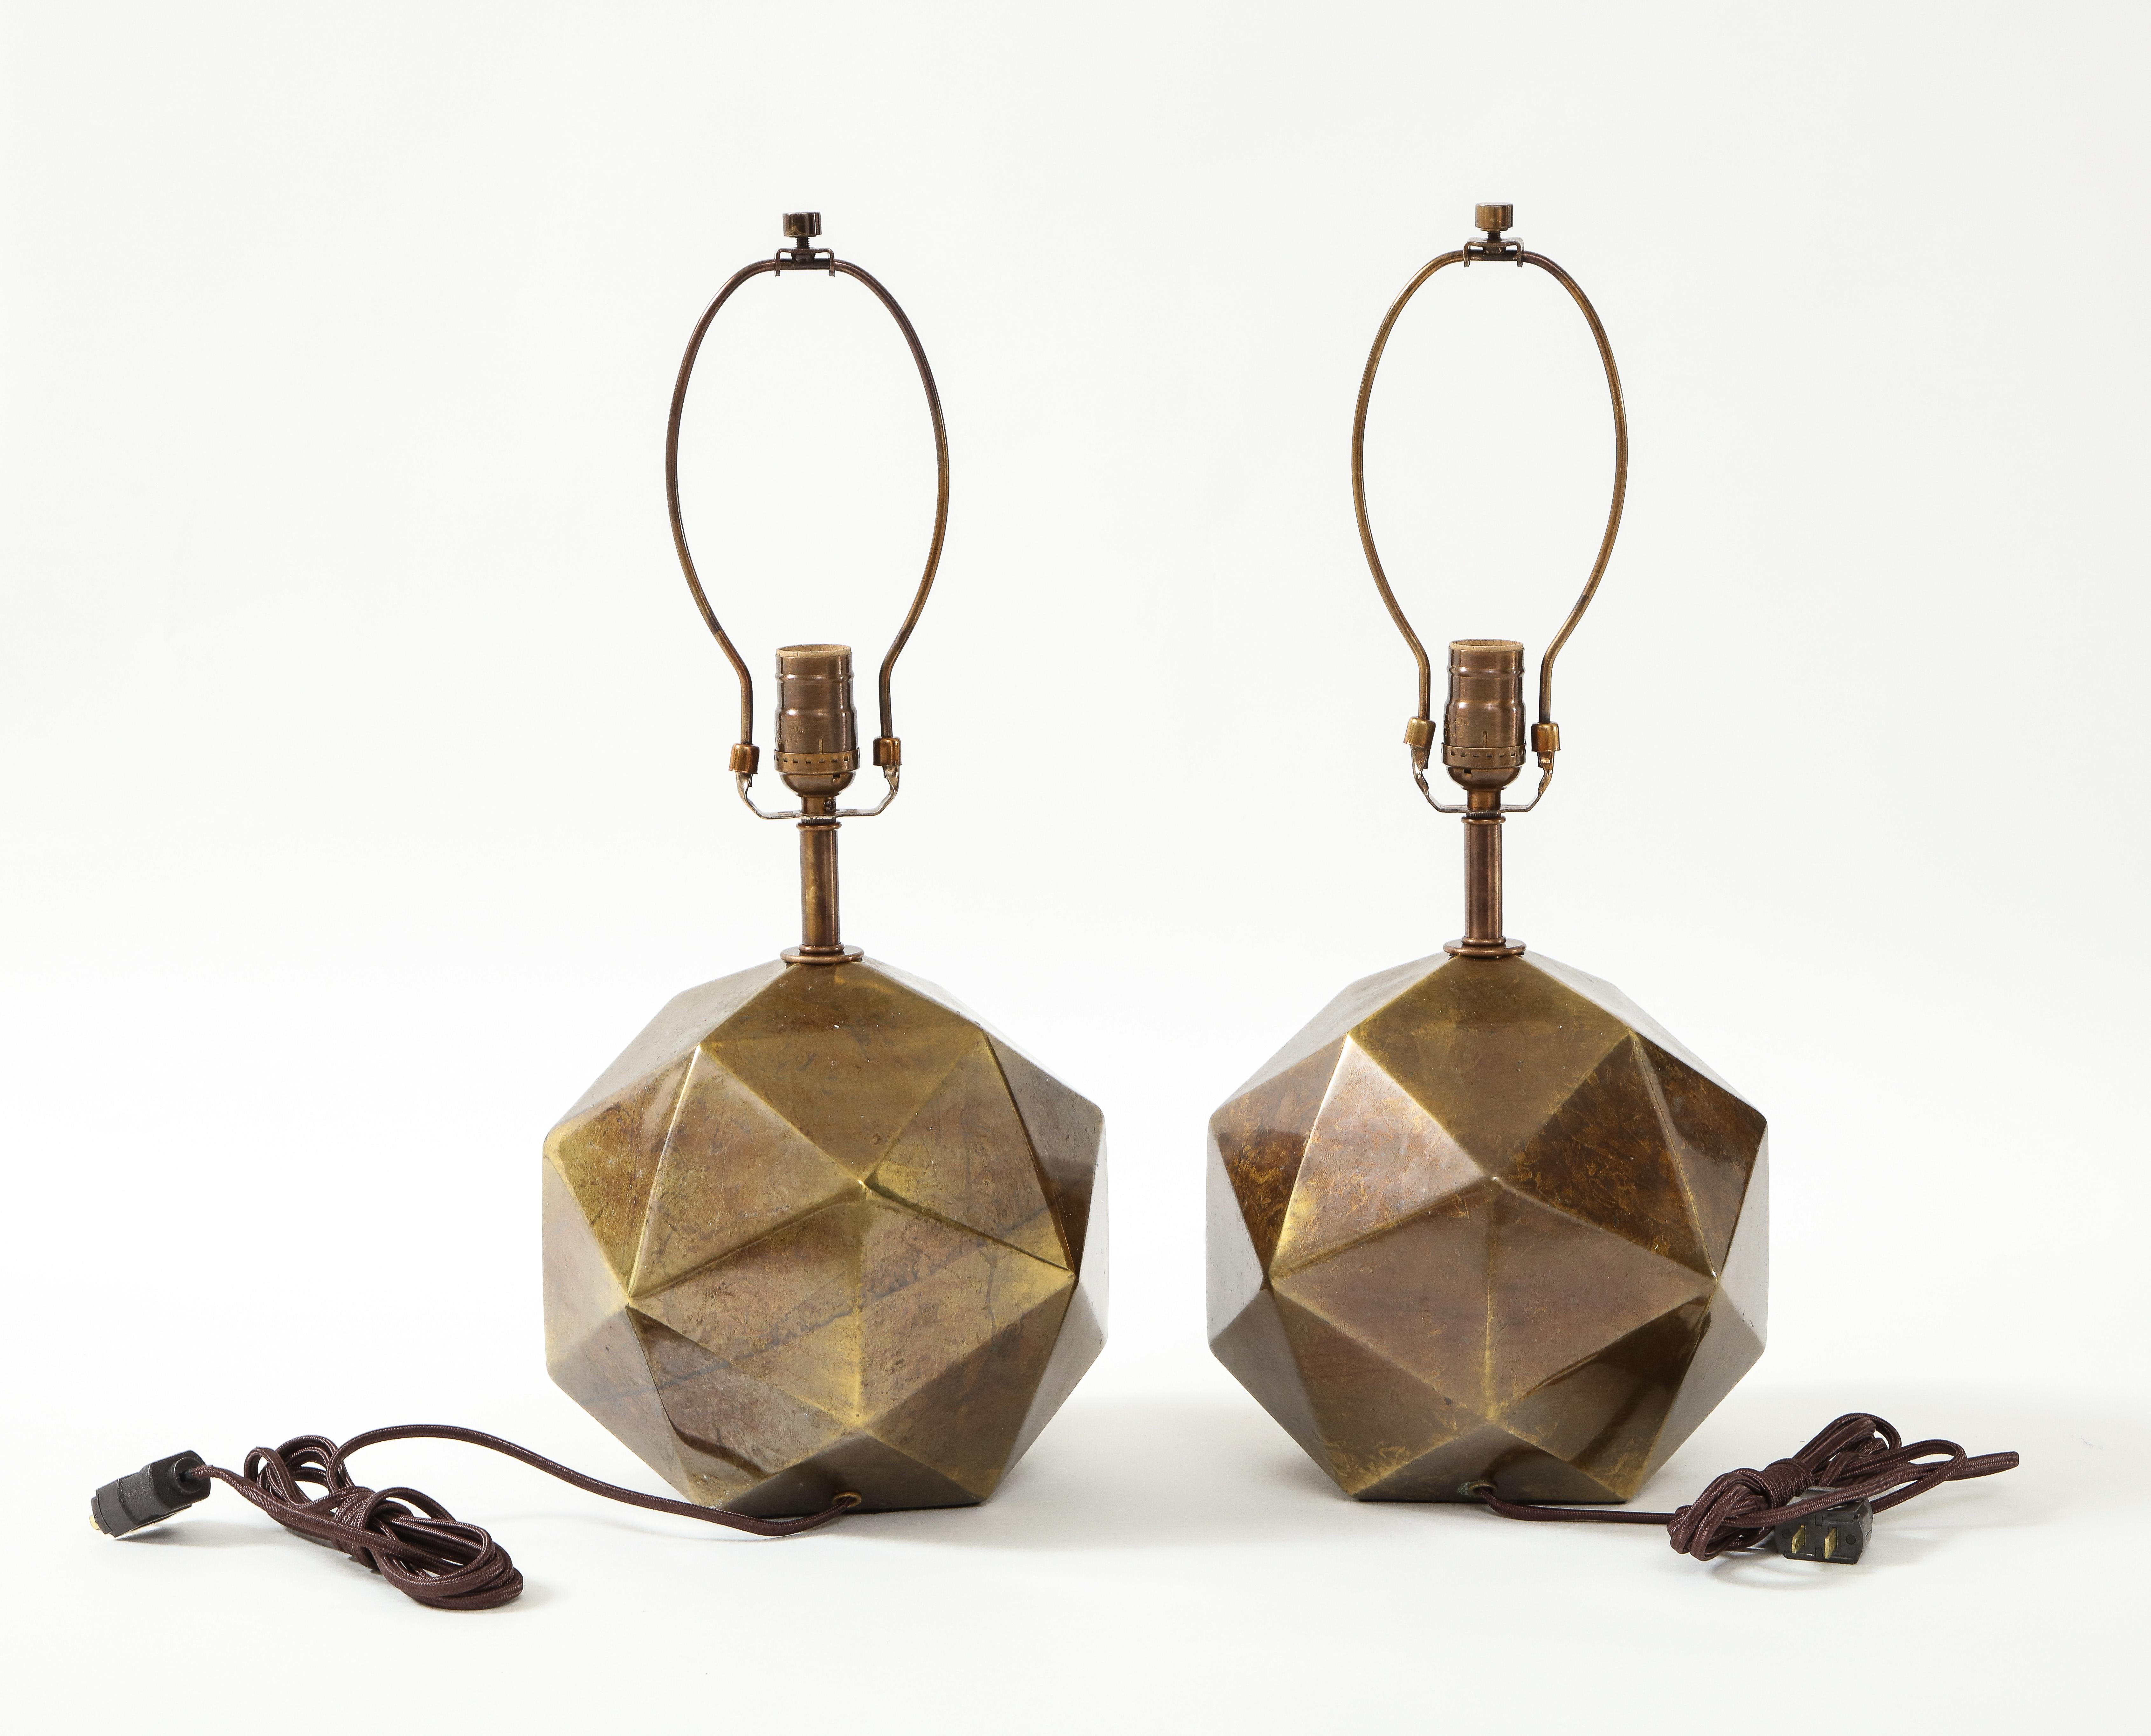 Pair of modernist aged bronze geodesic lamps rewired with black silk cord and new sockets. C. 70s USA.